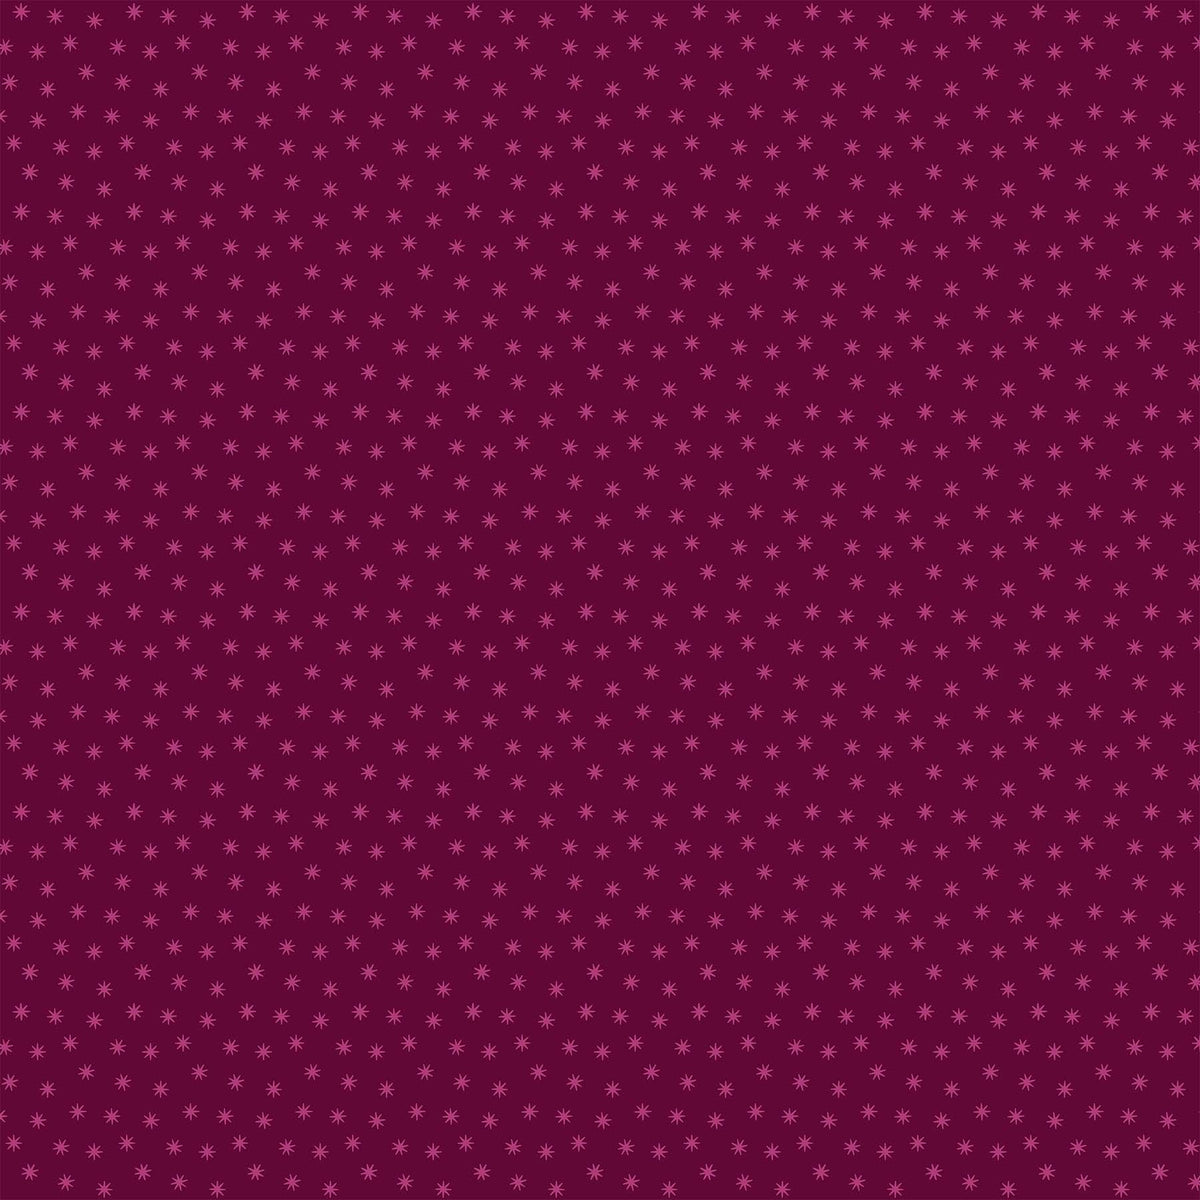 Happiness Quilt Fabric - Pinwheel in Berry Red/Purple - 90599-28